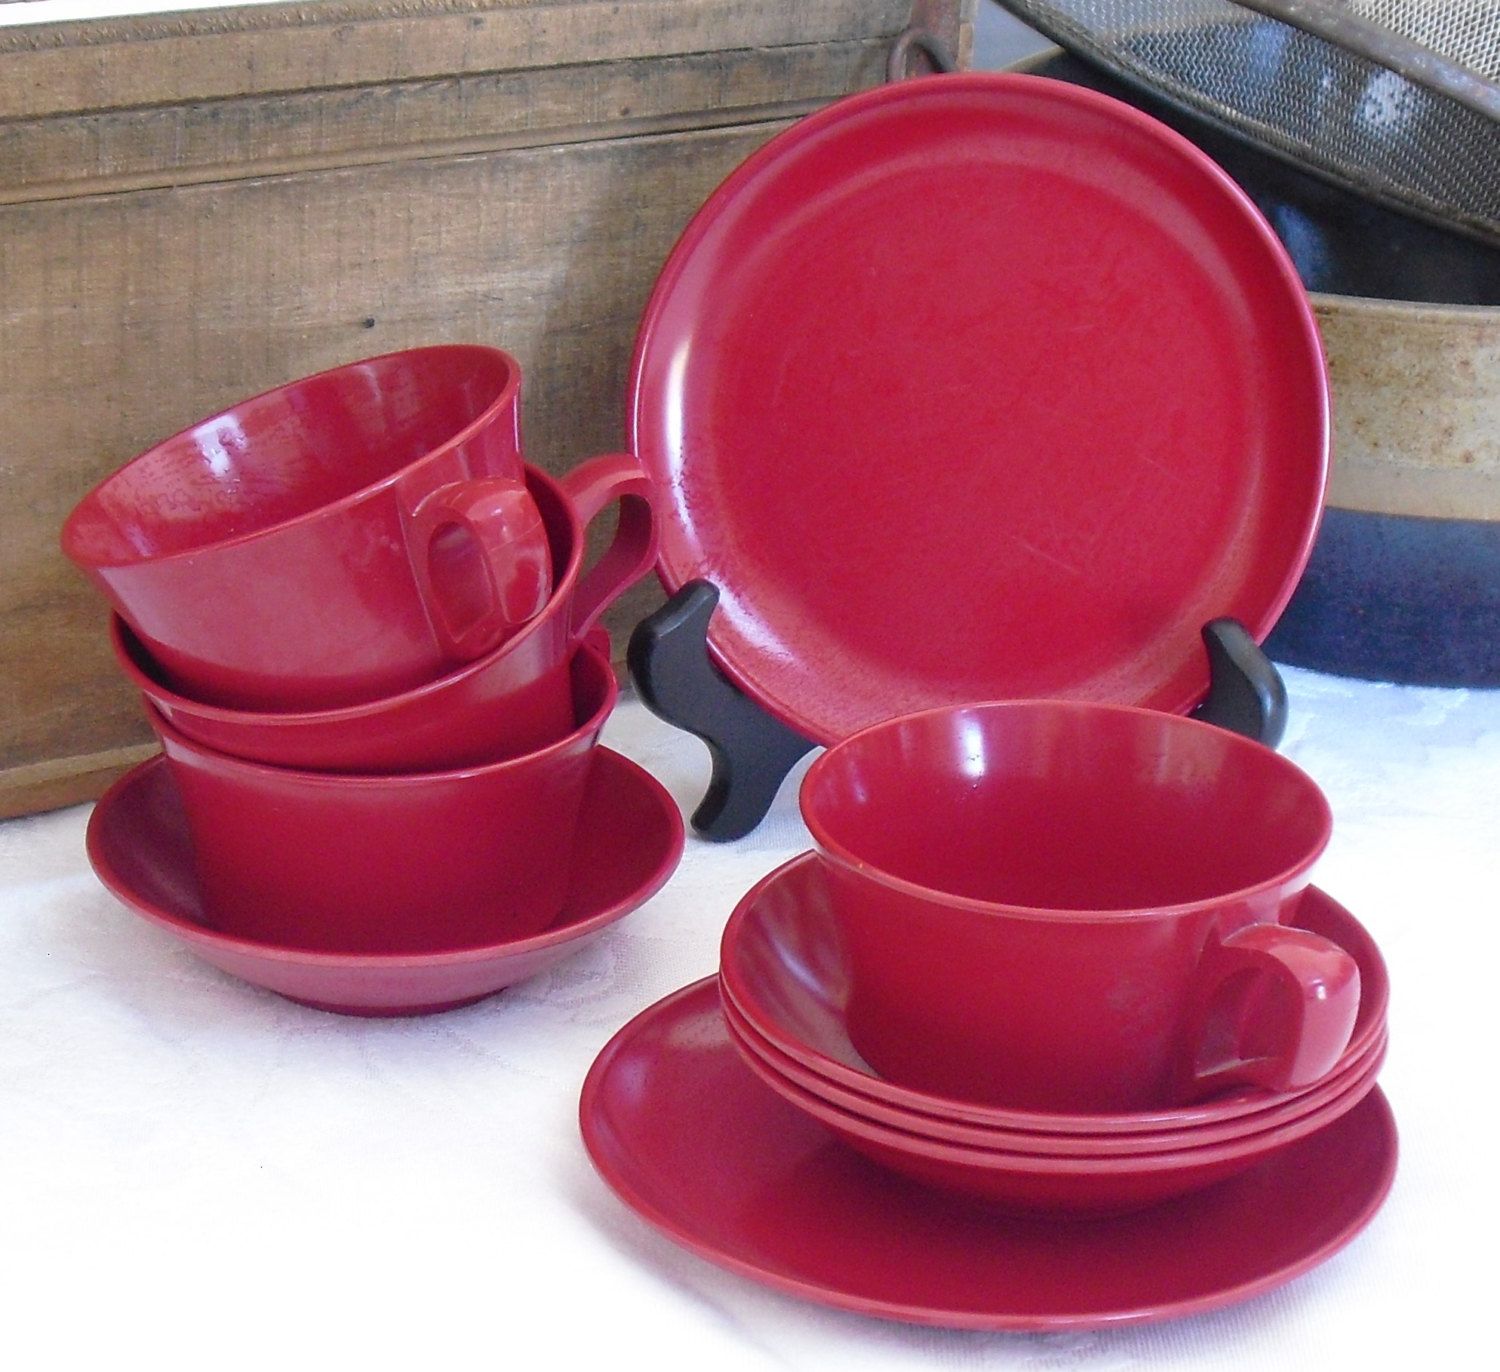 Vintage Red Melamine Cups, Bowls, Plates, Allied Chemical, 1950s ...